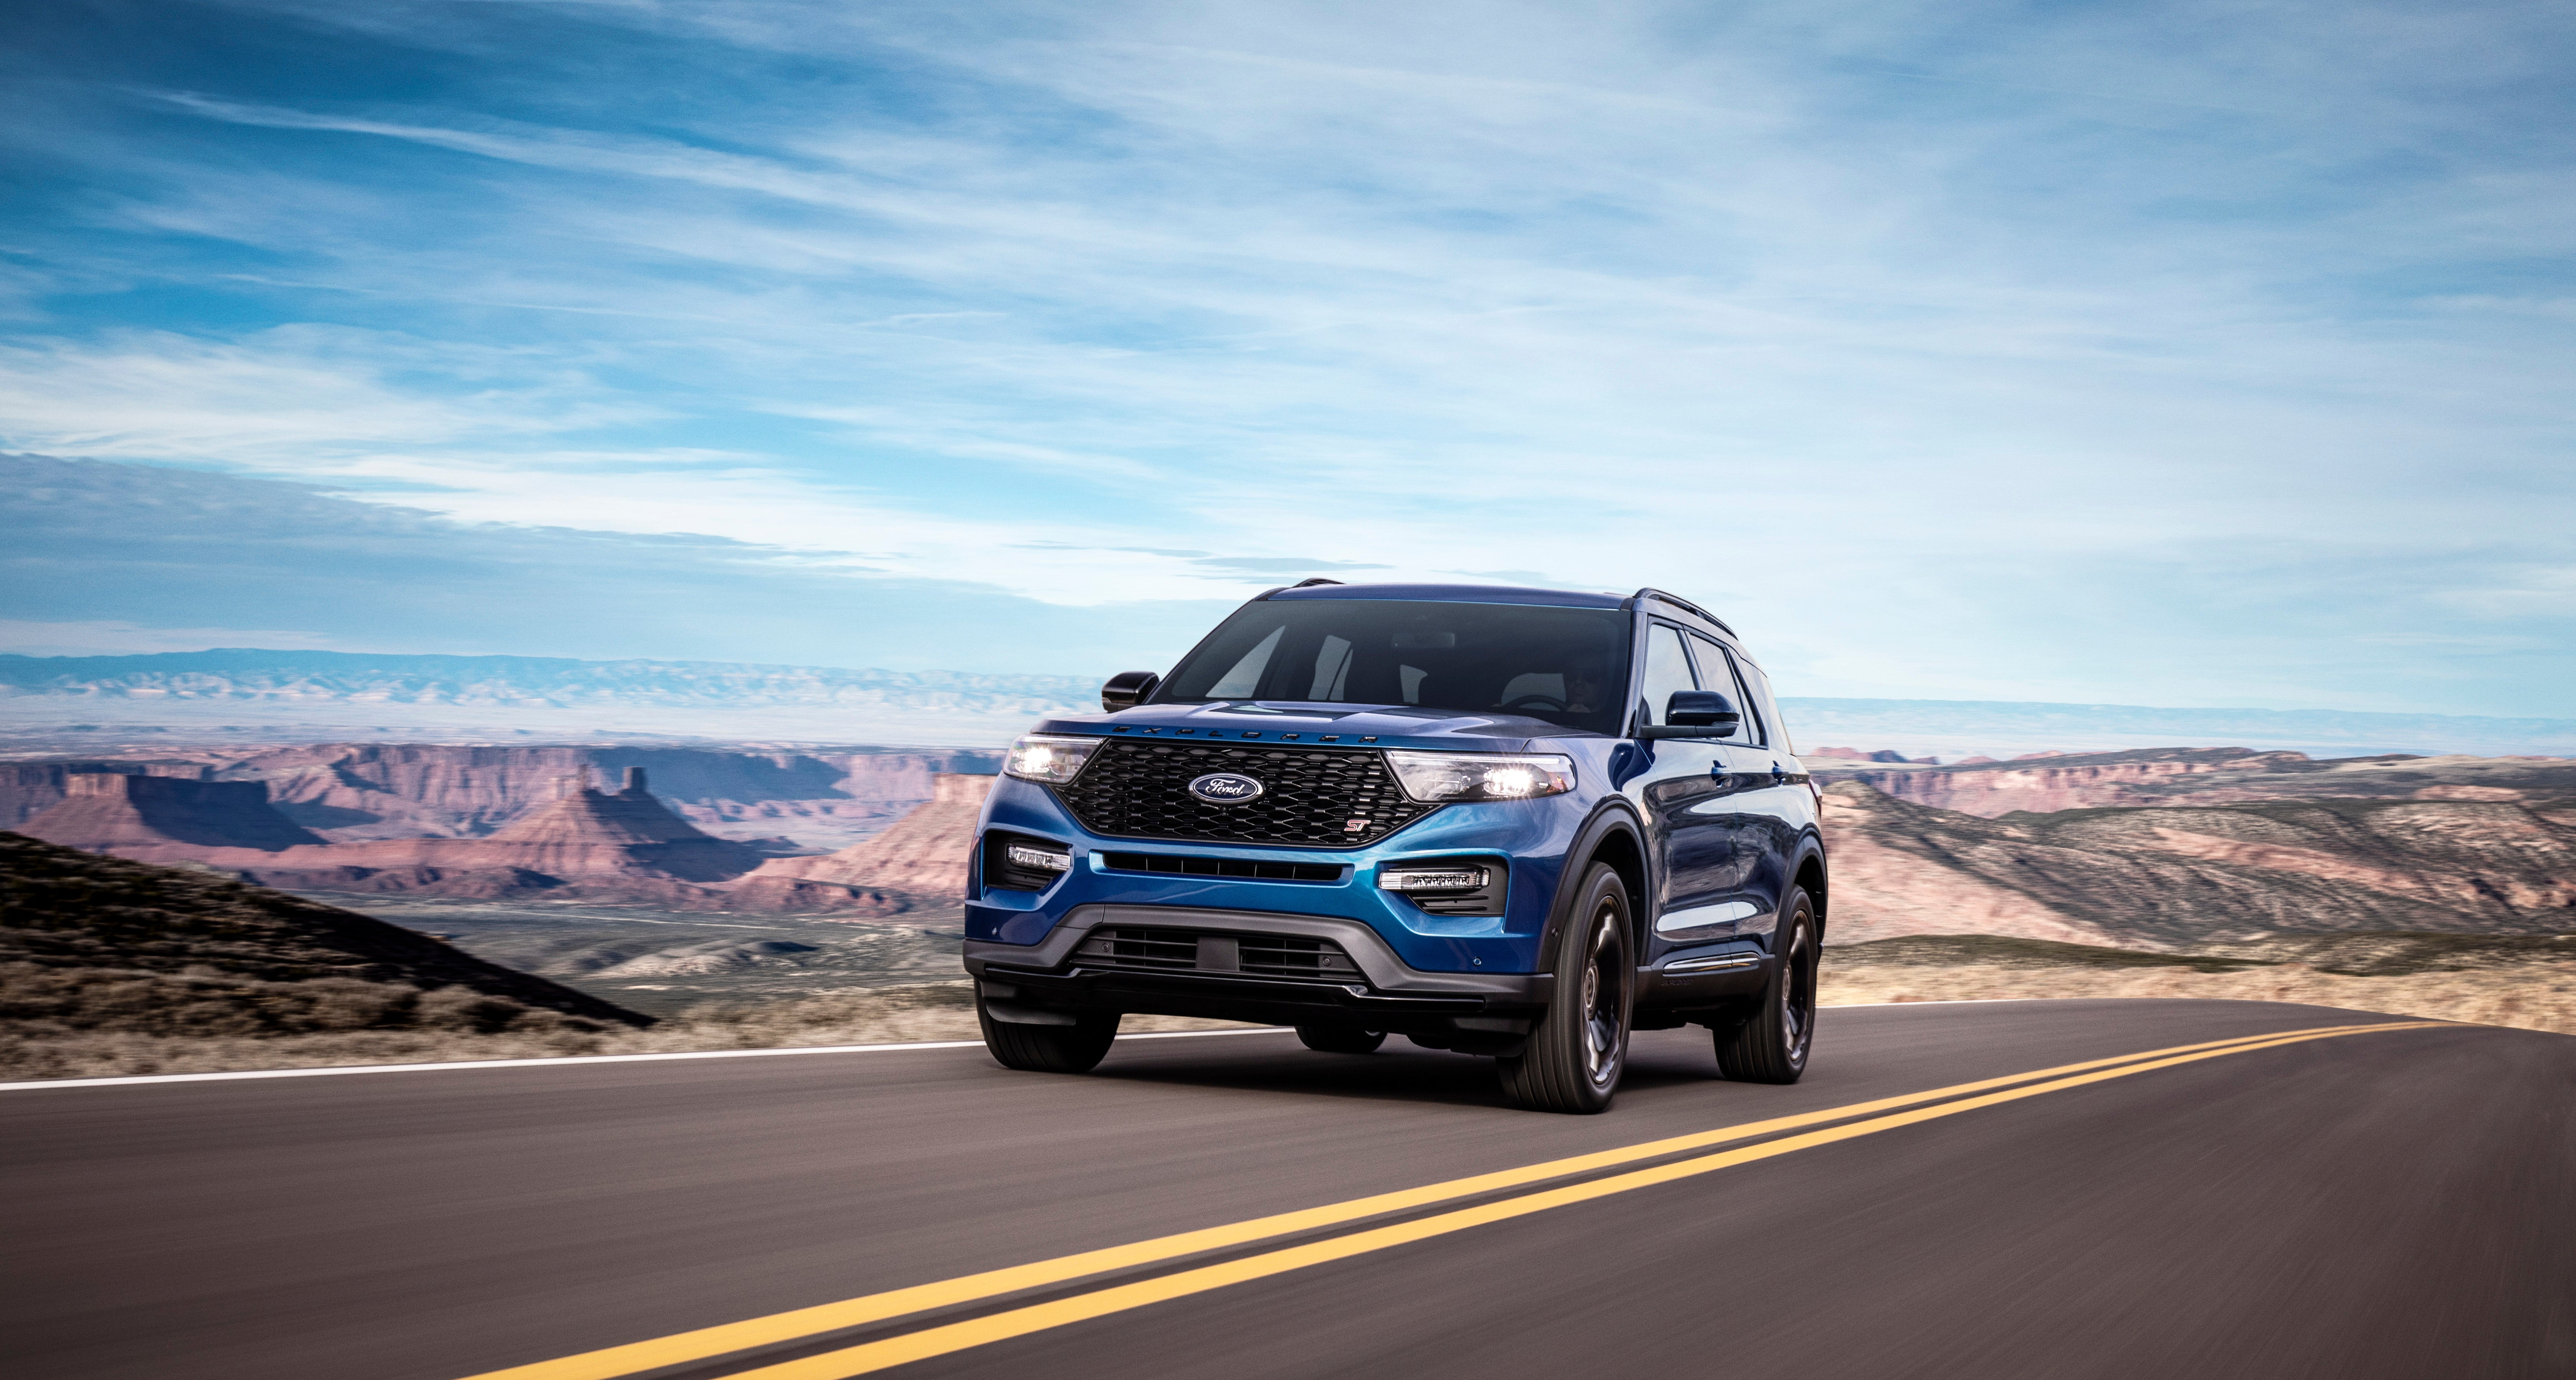 The 2020 Ford Explorer at Ford of Dalton